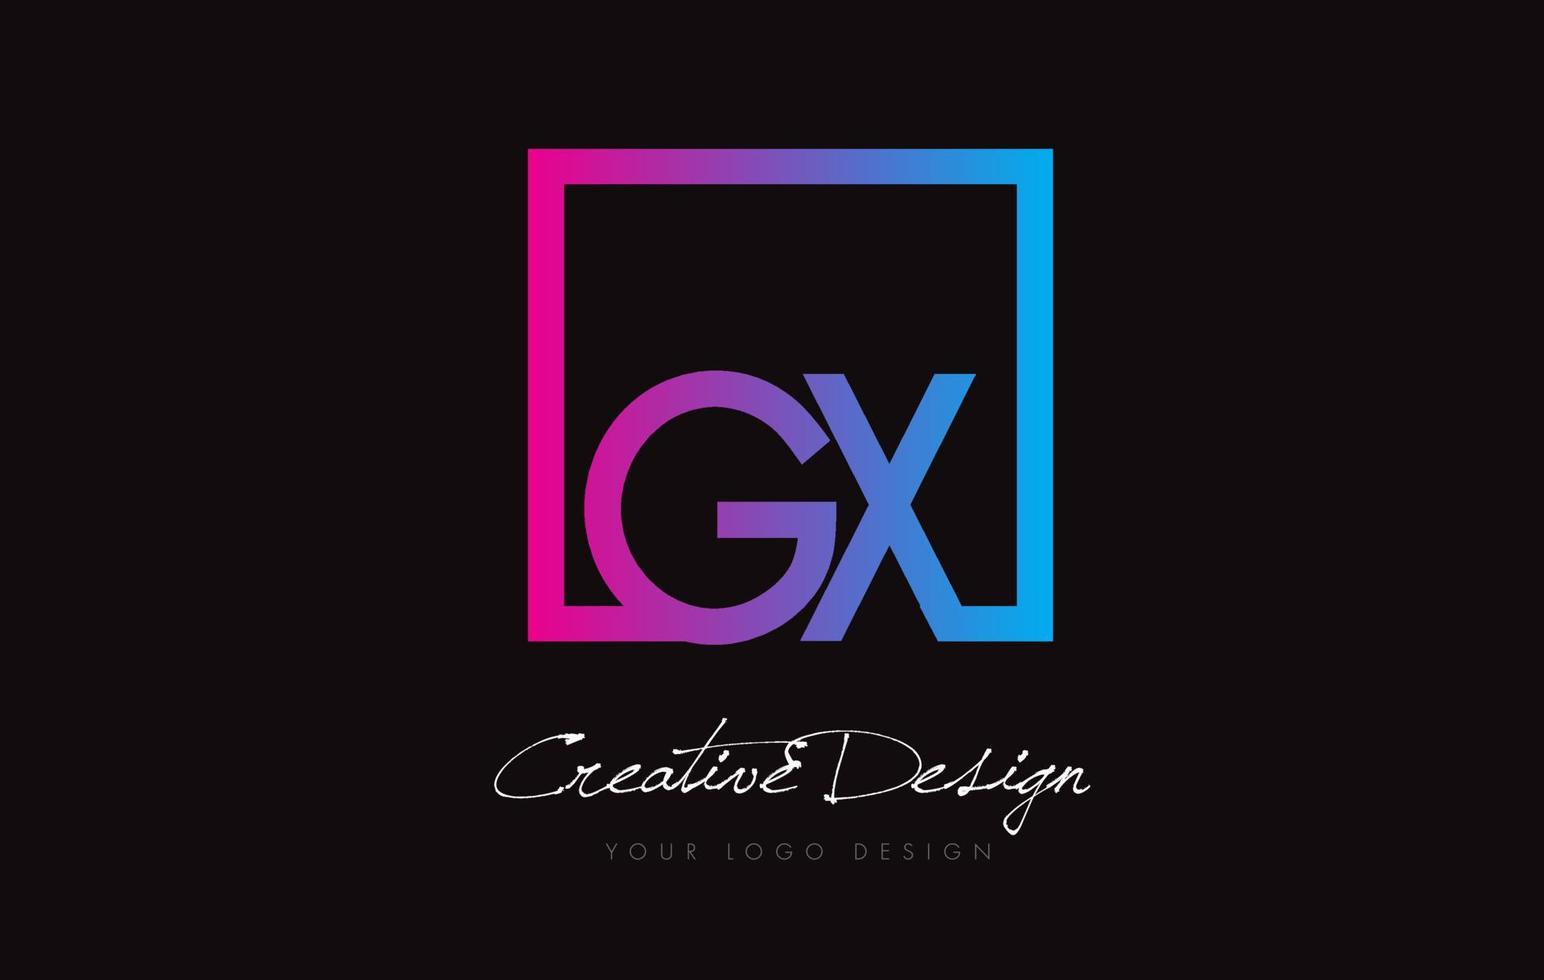 GX Square Frame Letter Logo Design with Purple Blue Colors. vector